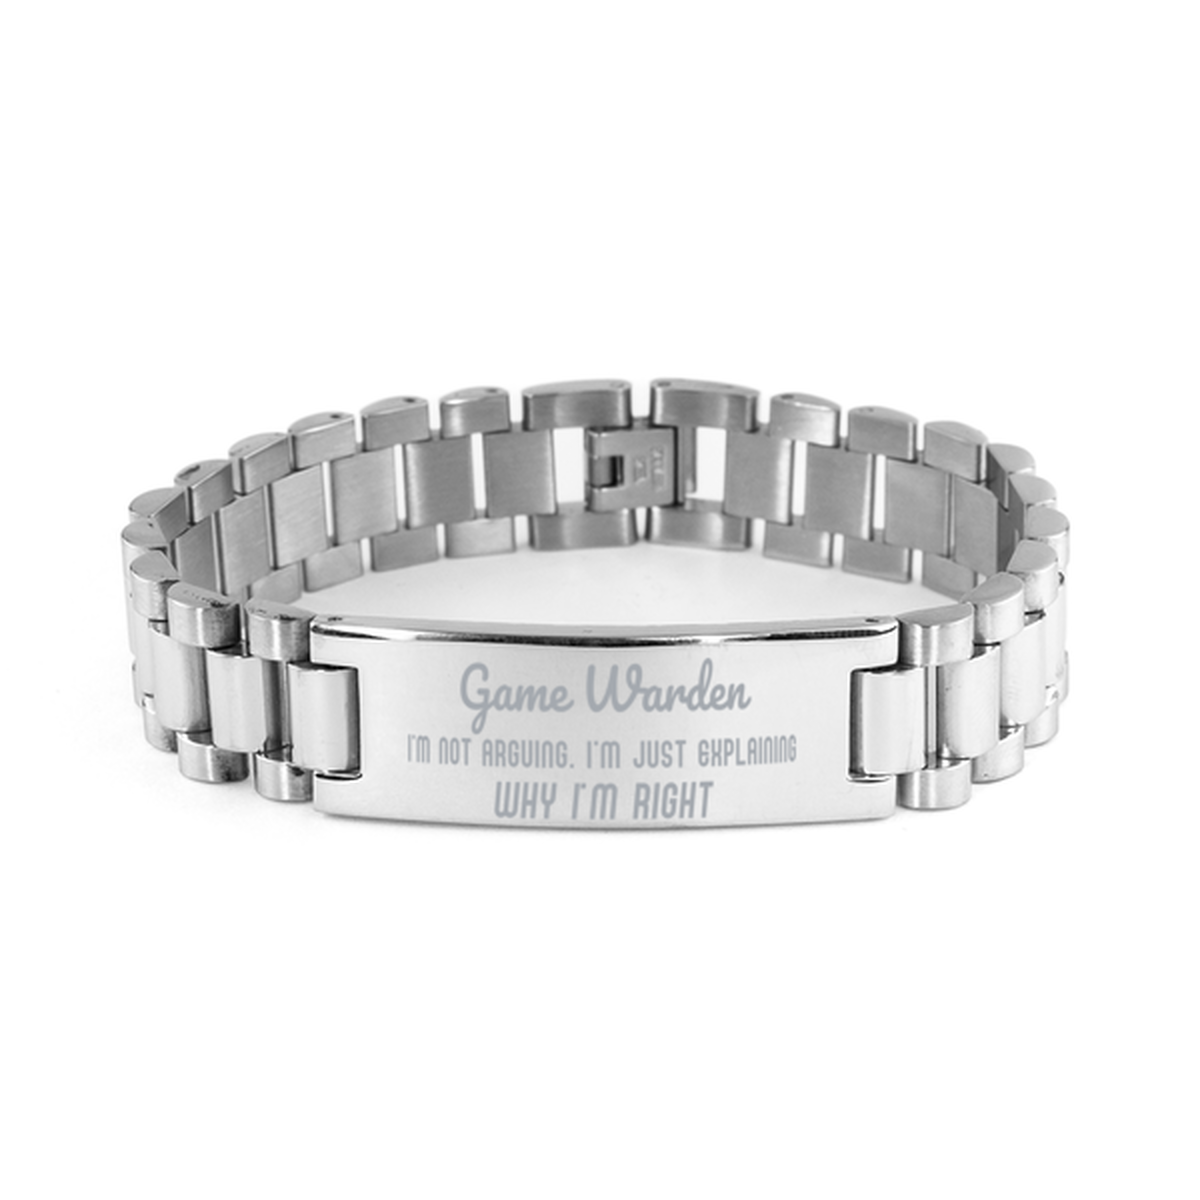 Game Warden I'm not Arguing. I'm Just Explaining Why I'm RIGHT Ladder Stainless Steel Bracelet, Graduation Birthday Christmas Game Warden Gifts For Game Warden Funny Saying Quote Present for Men Women Coworker